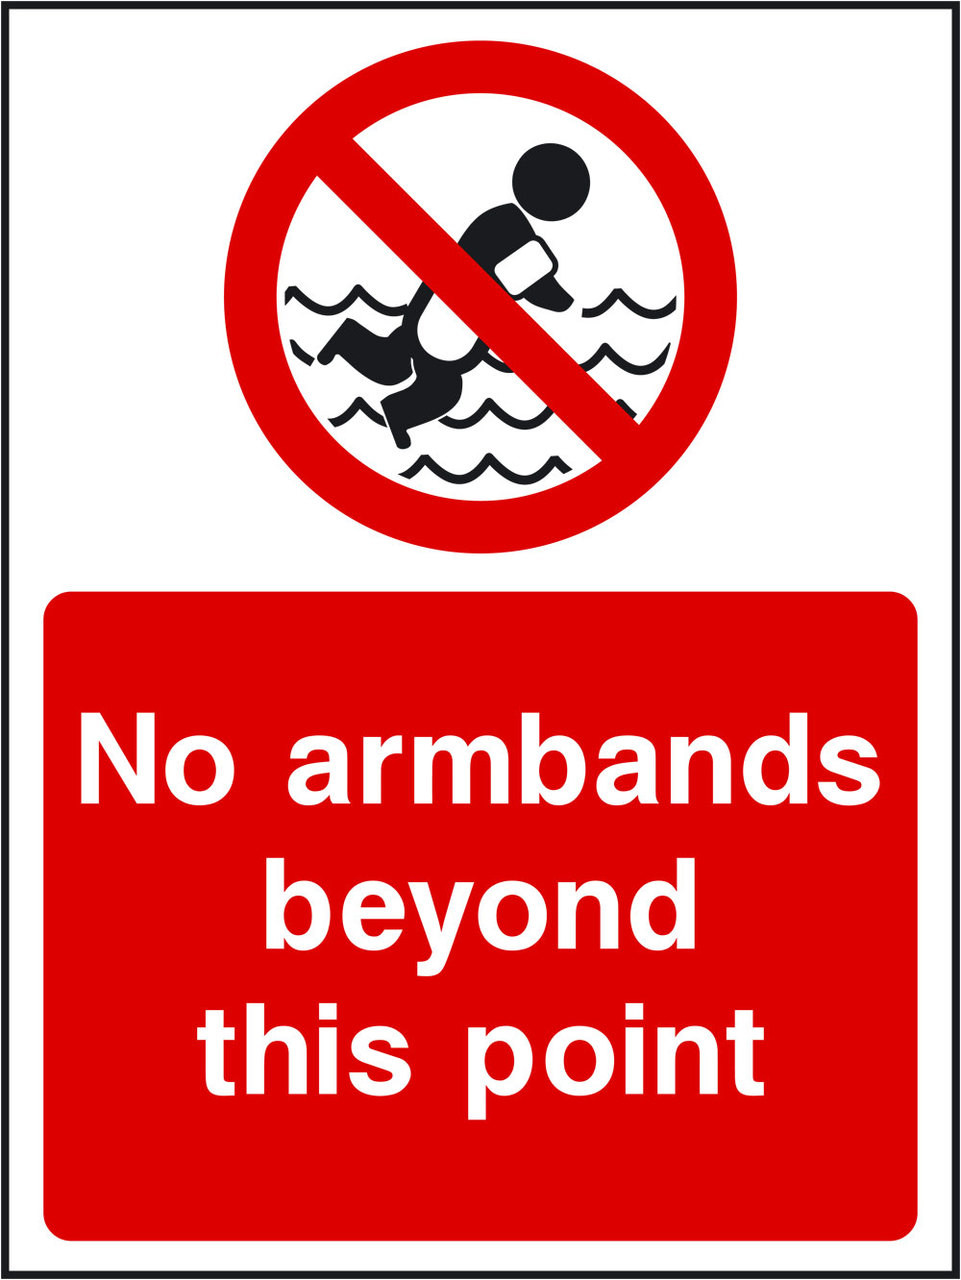 No armbands beyond this point